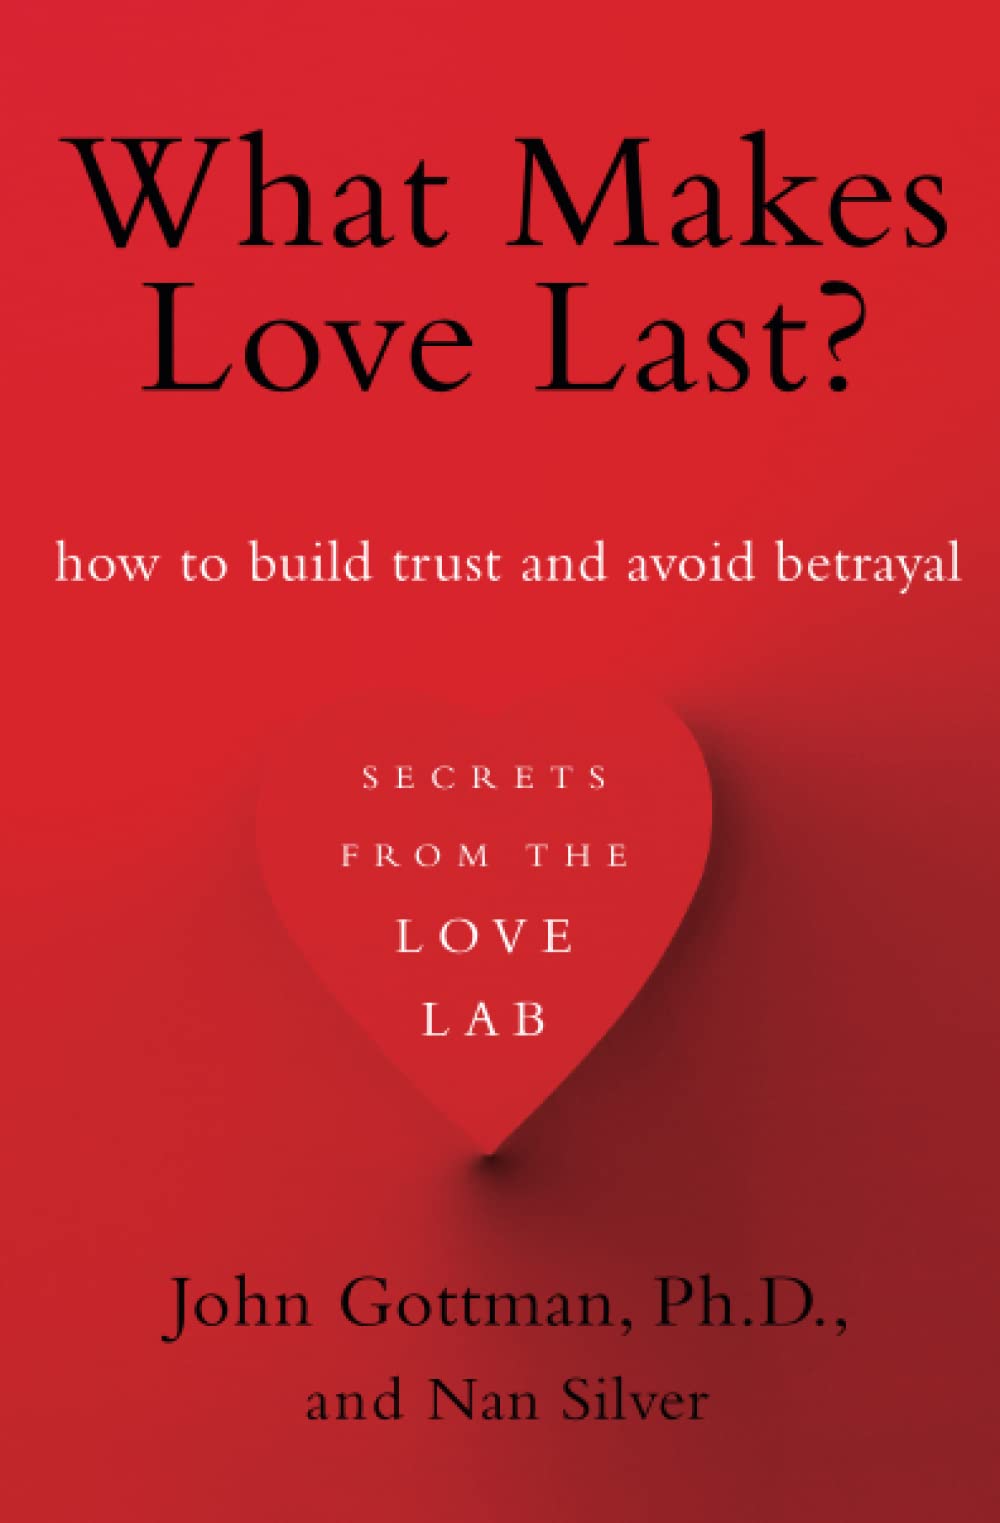 what makes love last? by john gottman book review